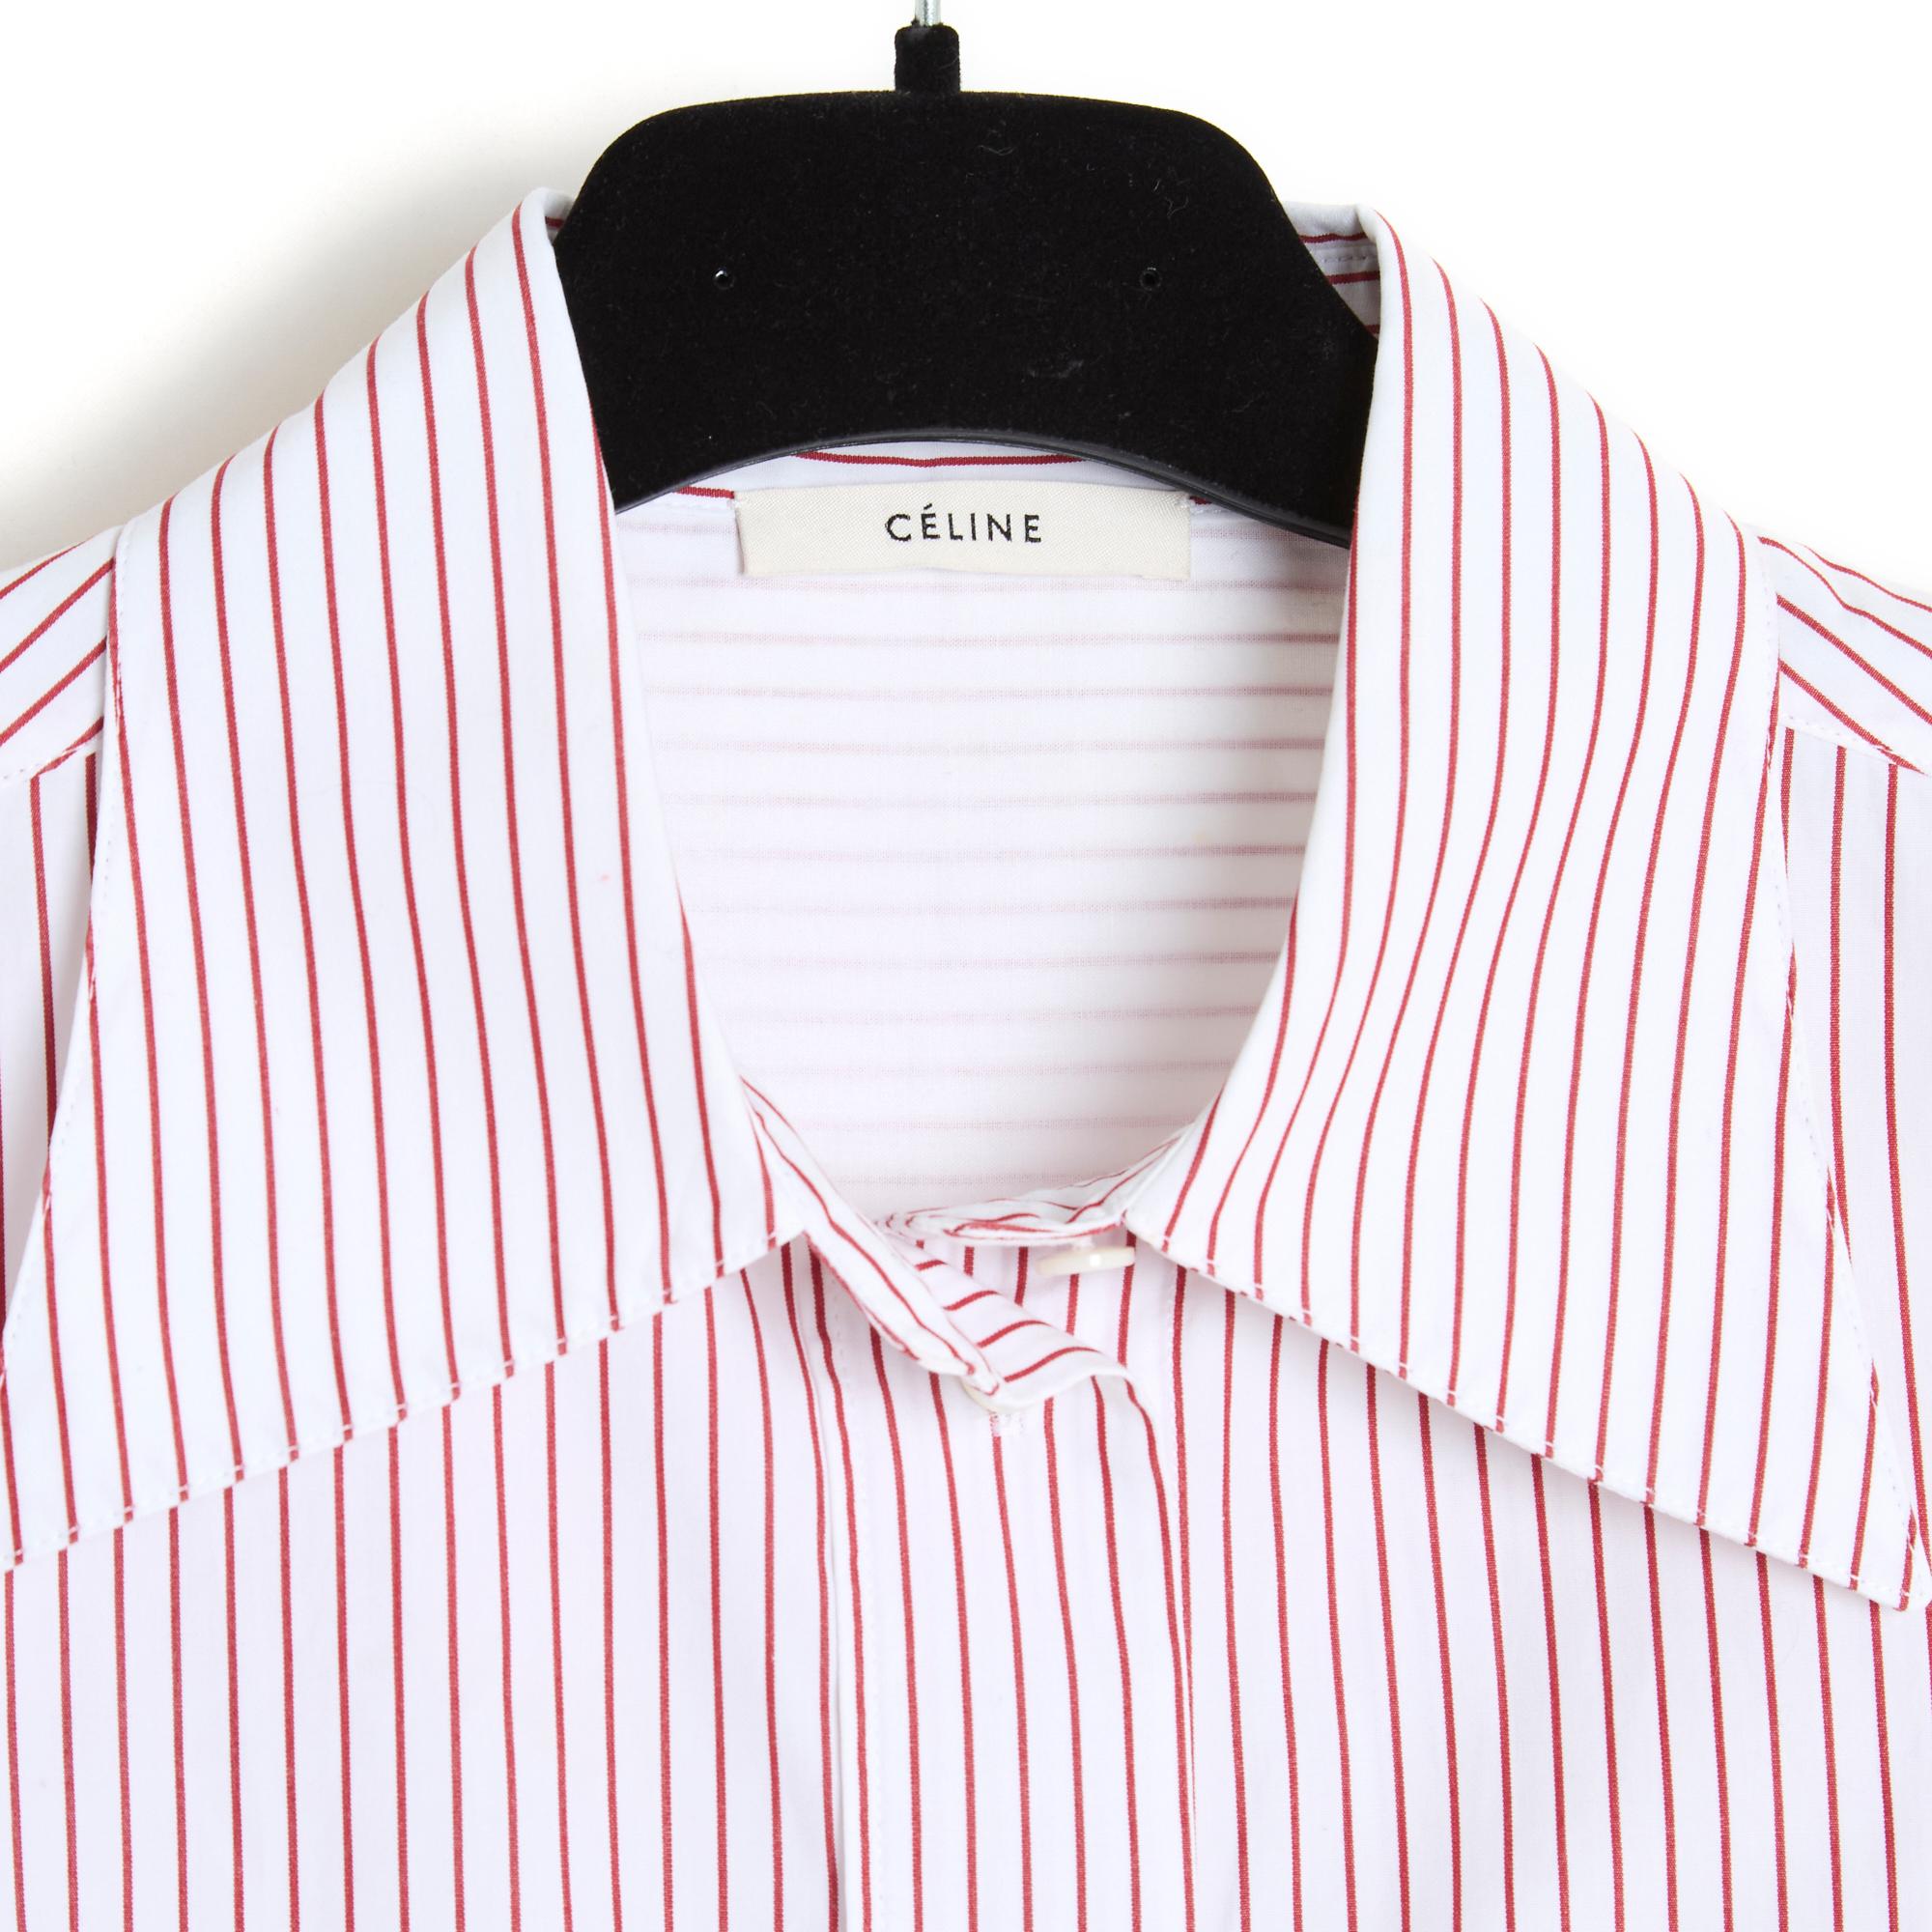 Céline top by Phoebe Philo circa 2012 in cotton poplin with fine red stripes, straight cut, shirt collar closed with 7 buttons, long sleeves closed with 2 buttons, shirt bottom. Size 38FR or UK10 and US8: middle 40 cm, chest 48 cm, length 80 cm,